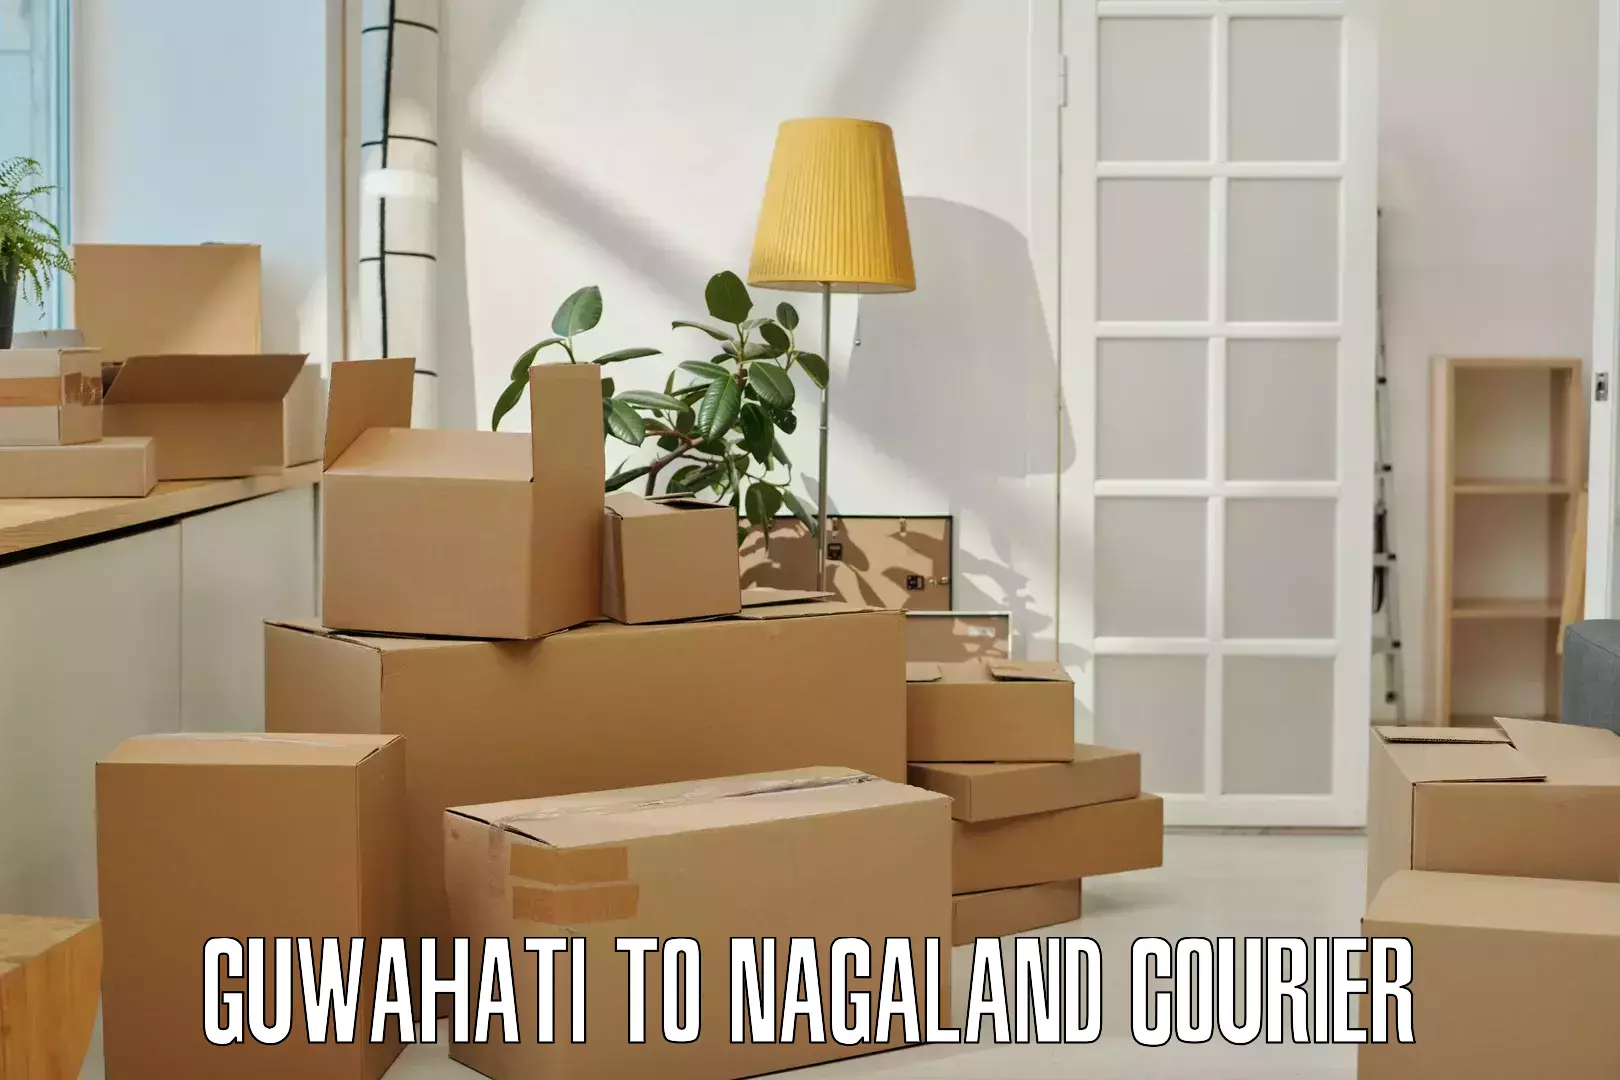 Rapid shipping services in Guwahati to Dimapur